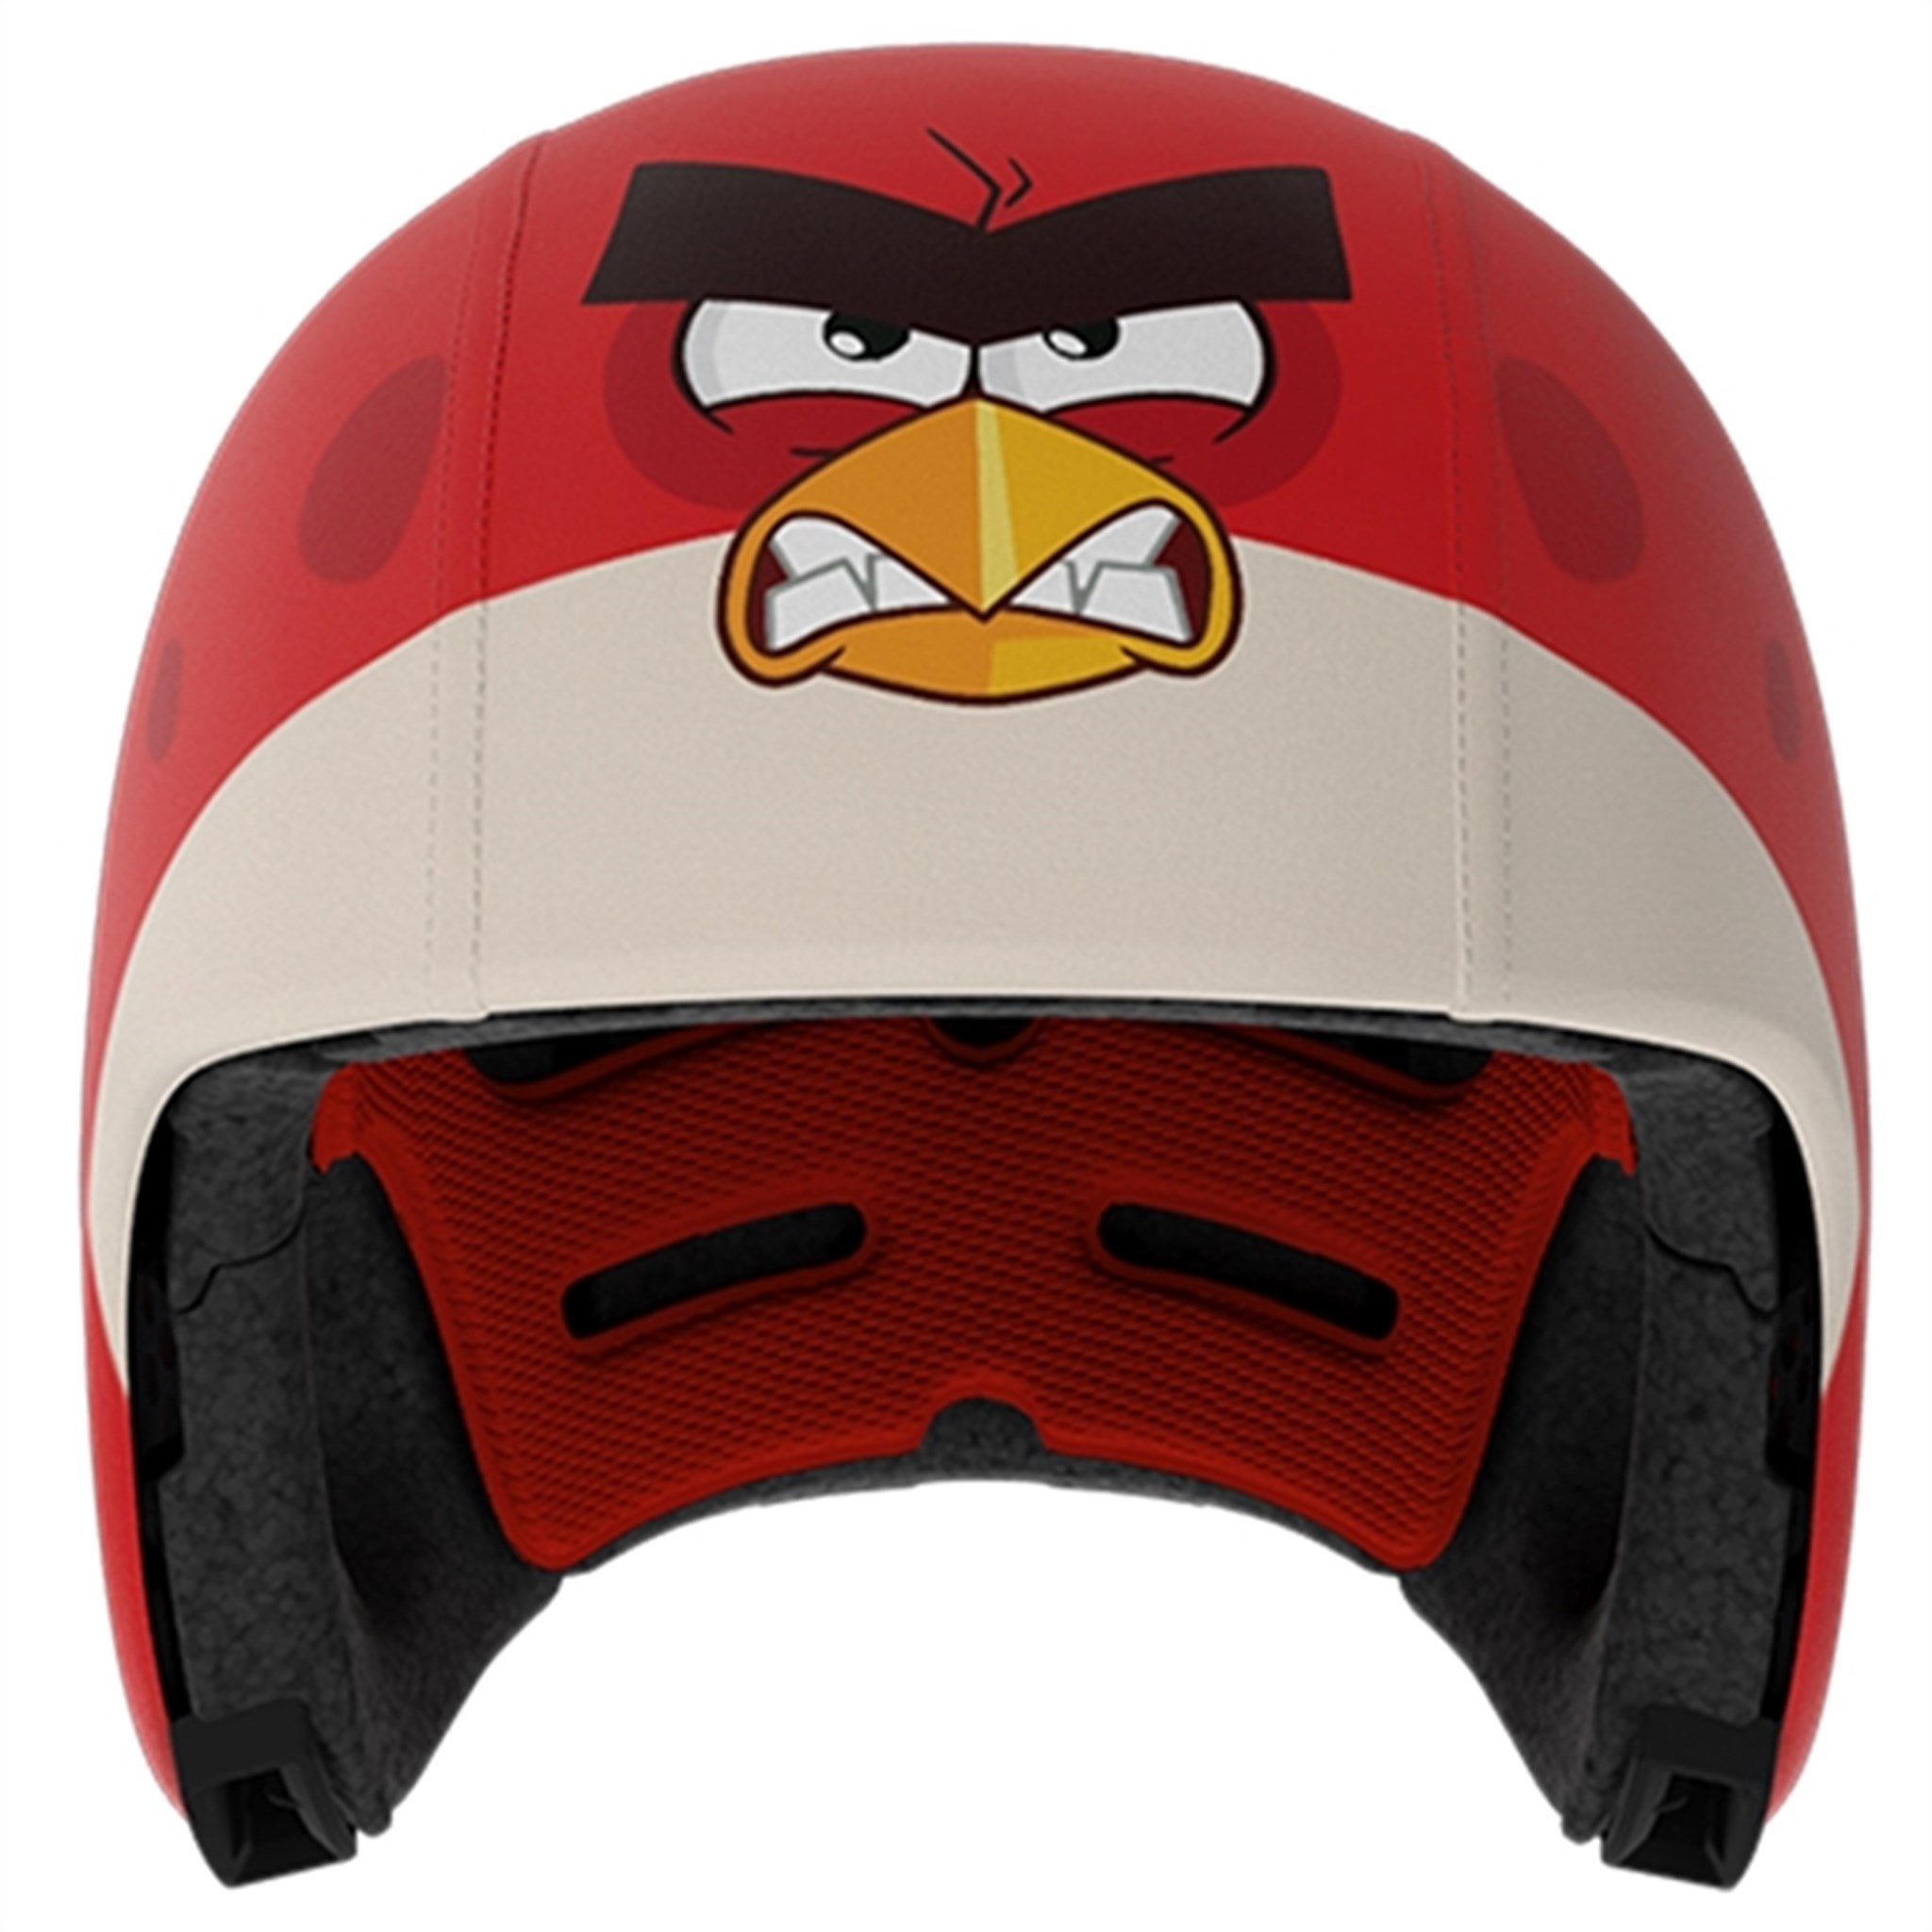 EGG Skin Angry Birds Red